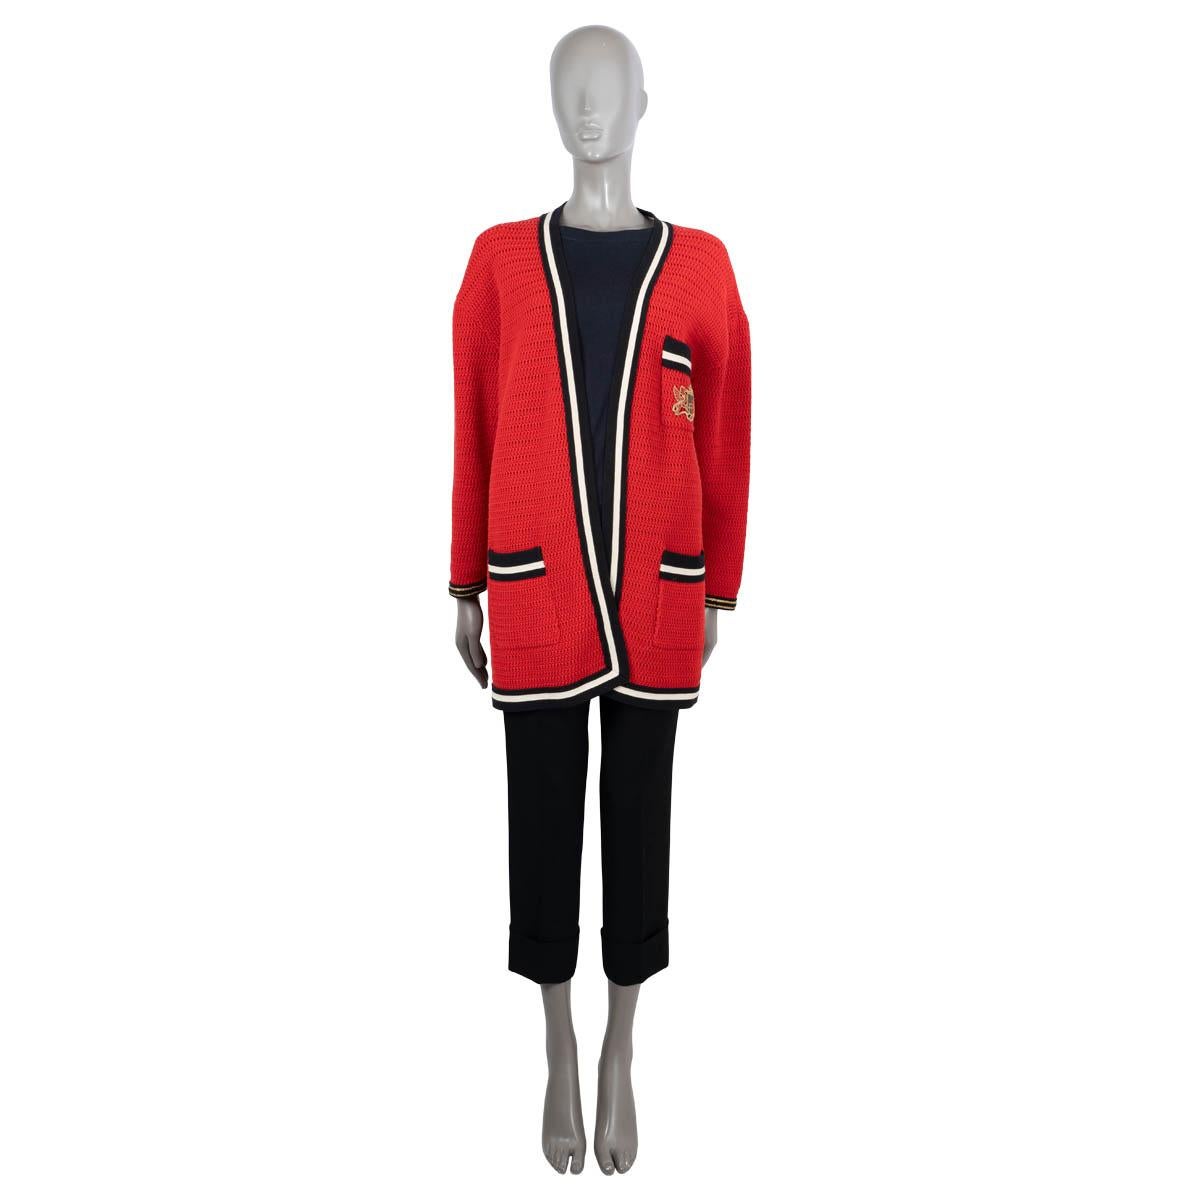 100% authentic Gucci crochet knit jacket in red cotton (55%) and polyamide (45%). Features a crest patch on the chest pocket, two patch pockets at the waist and contrast trims. Unlined. Has been worn with minor stains inside on the shoulders.